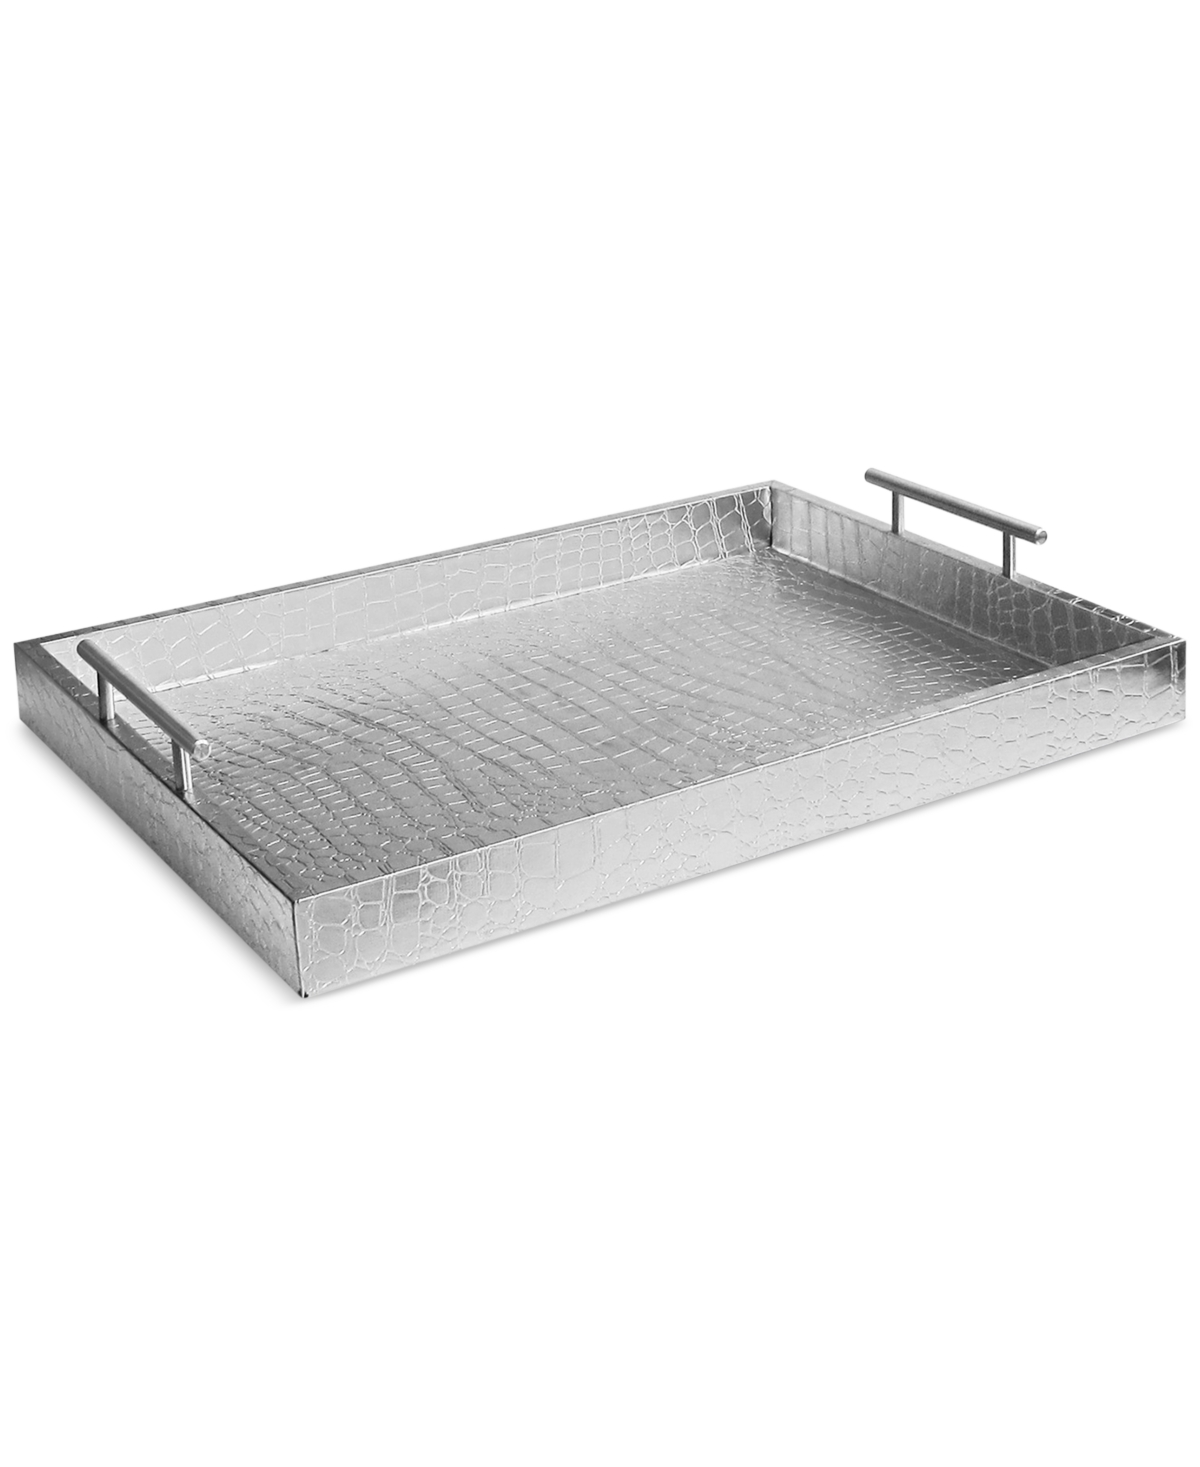 Jay Imports Alligator-embossed Tray With Metal Handles In Silver